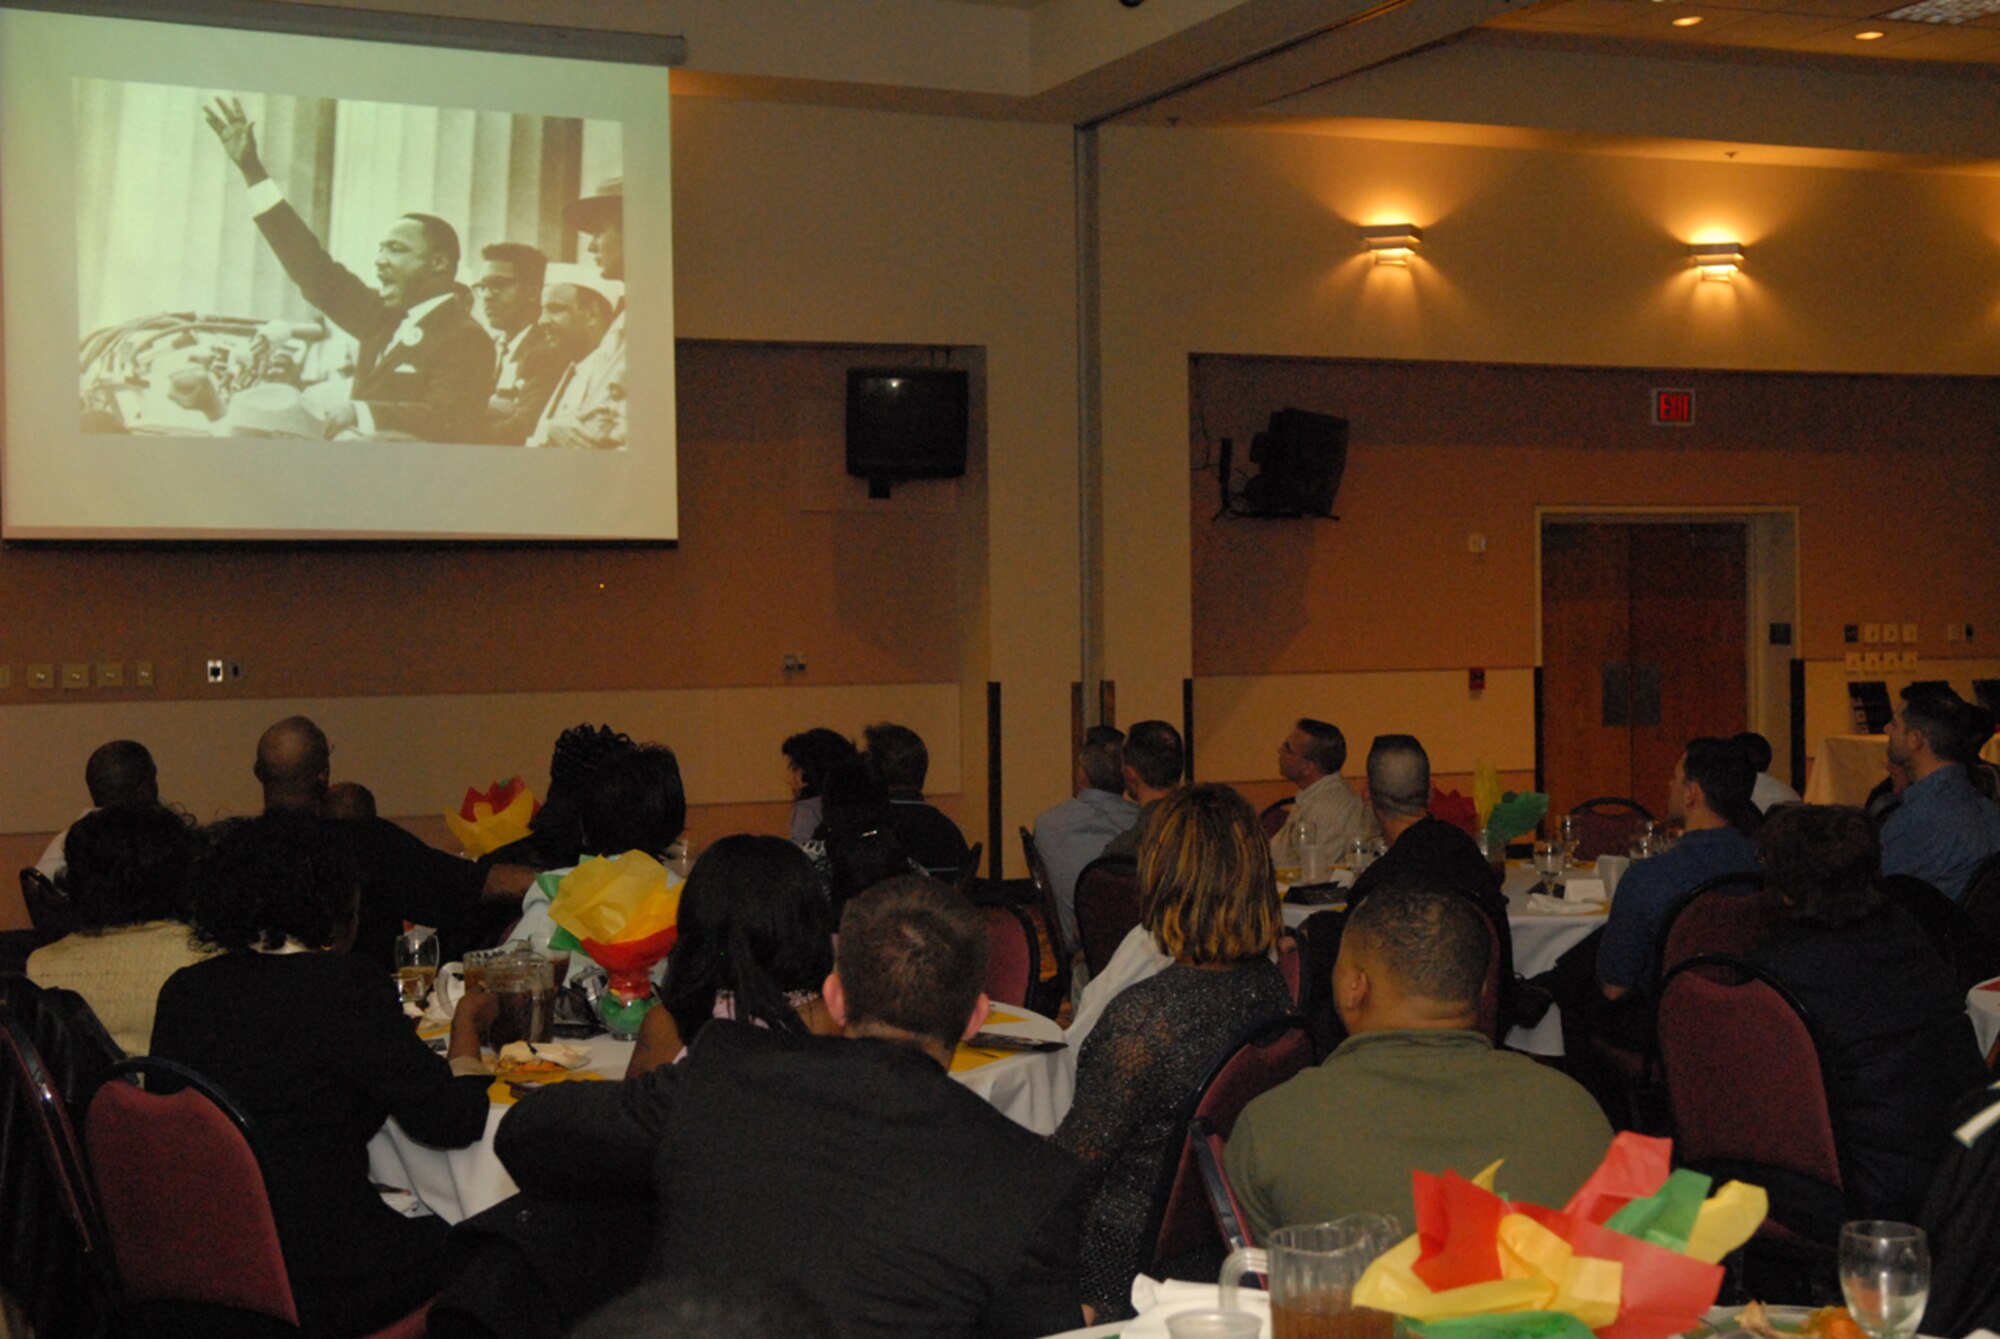 Guests watch a special slide presentation on Black history while Pastor Theodore Boone recites one of Dr. Martin Luther King Jr.’s speeches. “It was never boring. I enjjoyed the entertainment and I think the committee did an excellent job of educating guests about the contributions of African-Americans to American society. I really enjoyed the slide presntation too,” commented Airman 1st Class Stephanie Jackson. (U.S. Air Force photo by Tech Sgt. Randy Mallard)